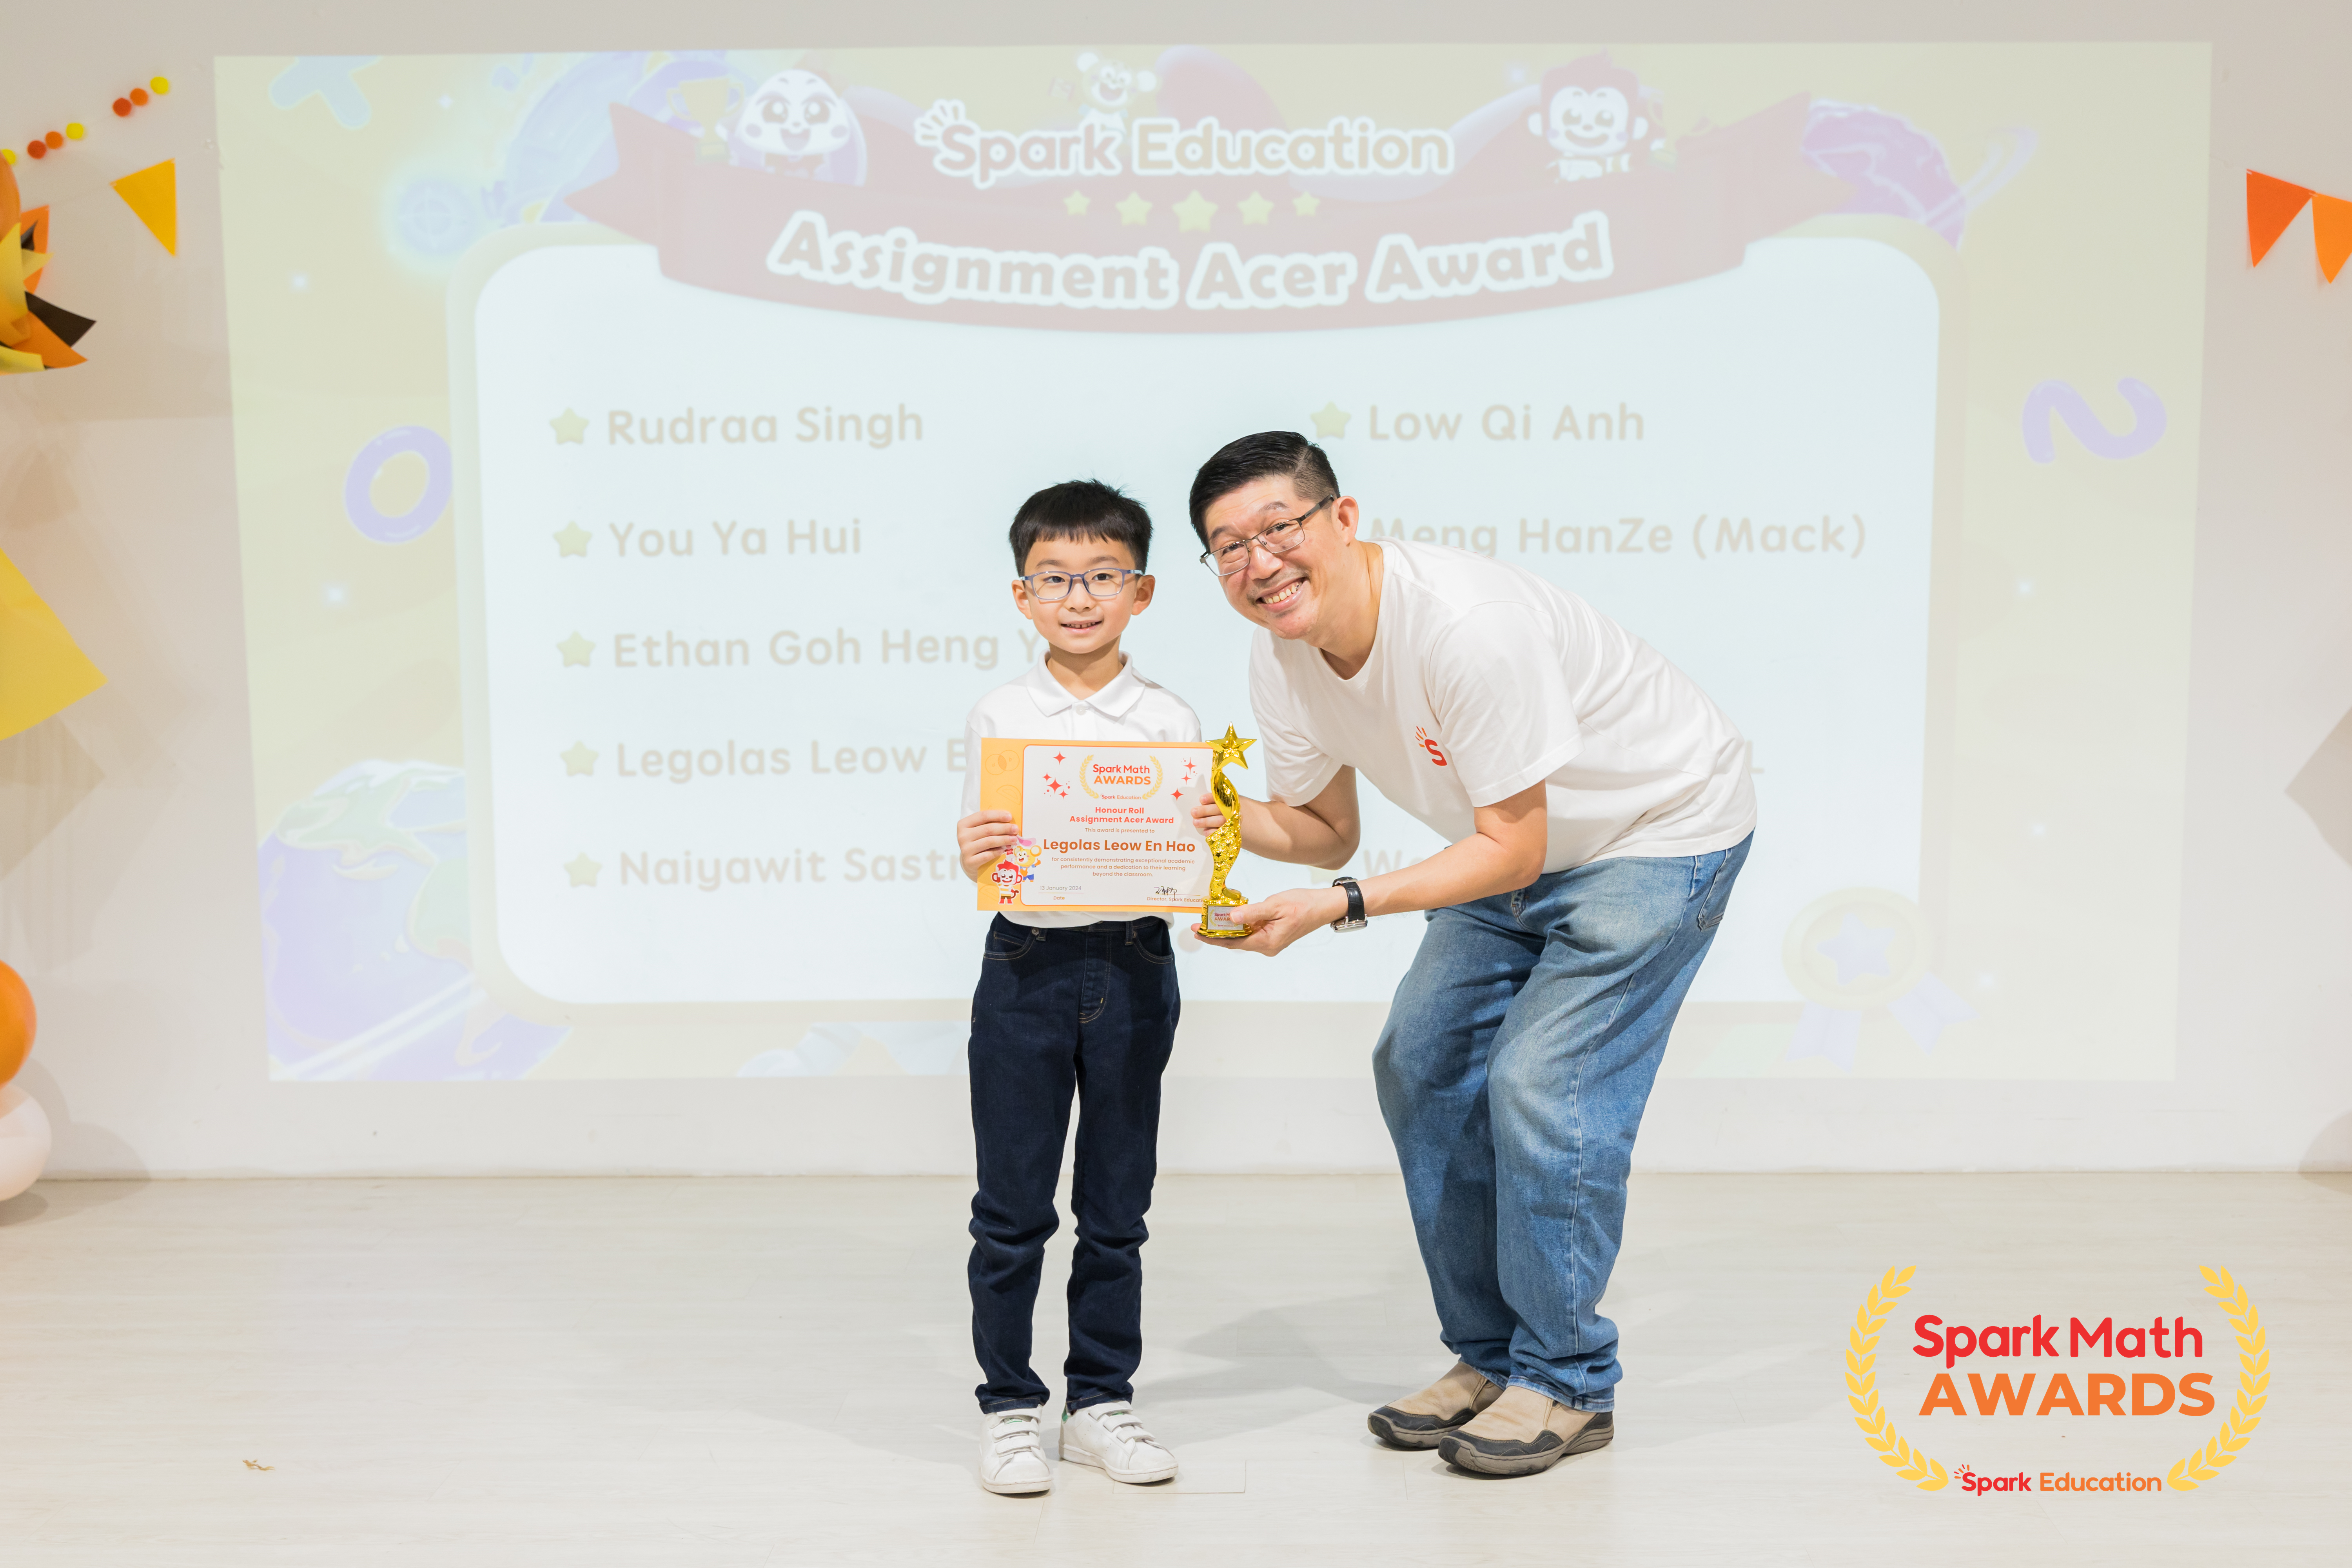 Teacher Winston, Upper Primary Curriculum Specialist, presenting the Honour Roll and Assignment Acer awards to top performing Spark Math winners who have shown dedication to learning beyond the classroom.